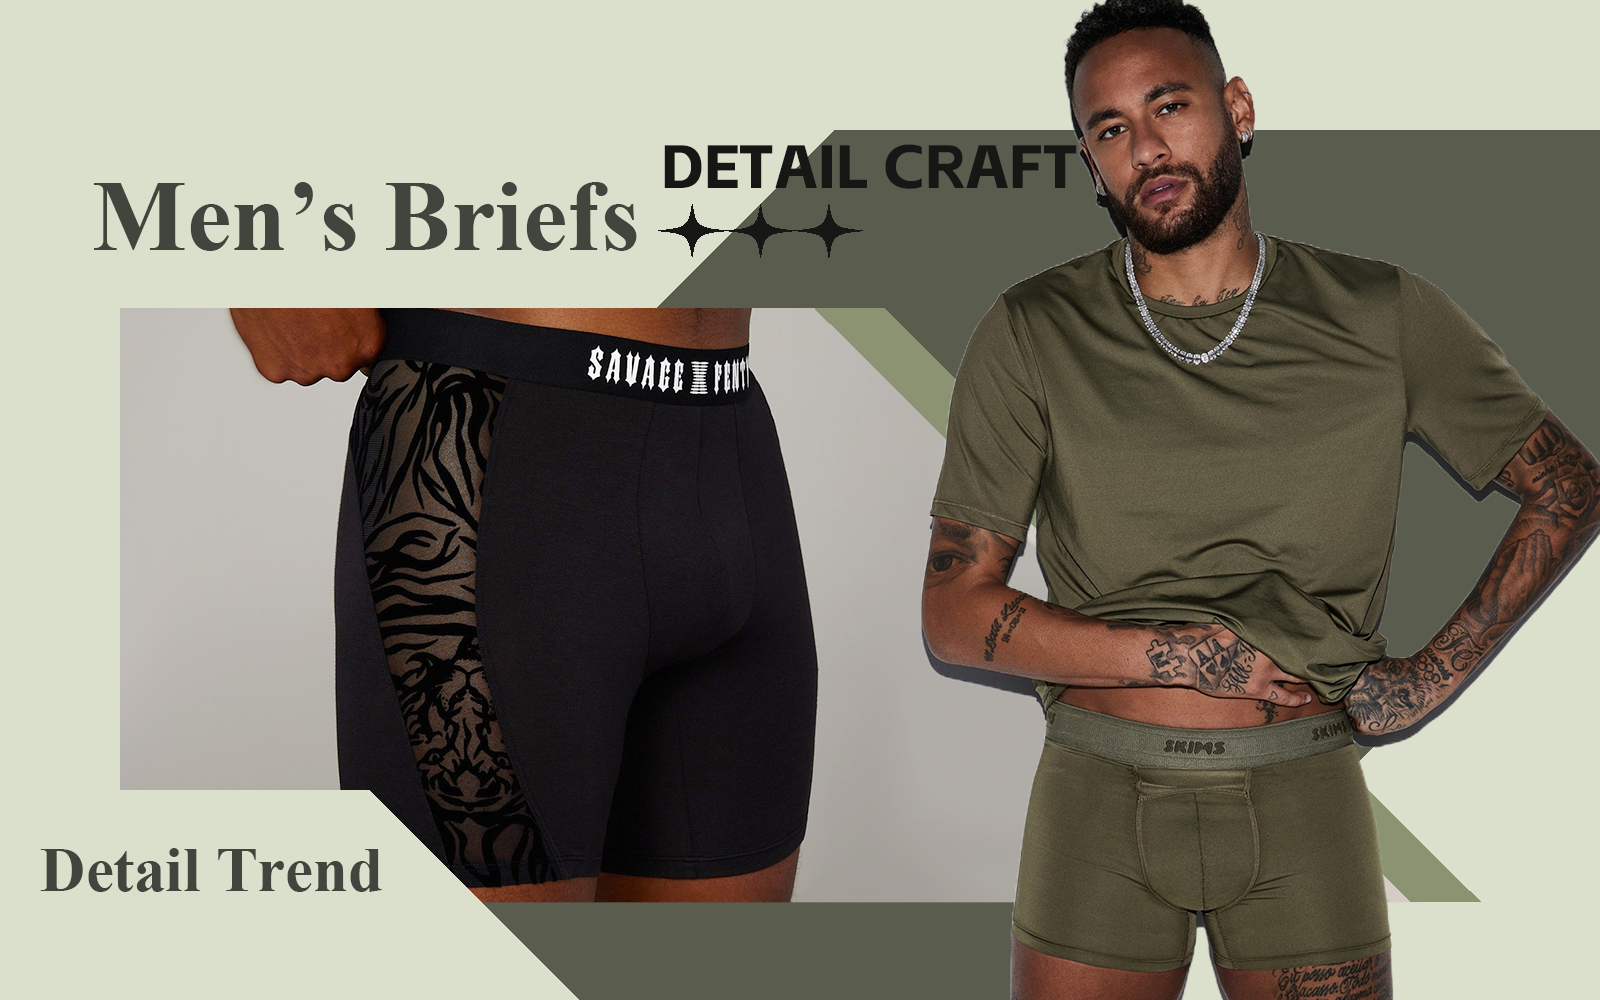 Cozy Feeling -- The Detail & Craft Trend for Men's Briefs